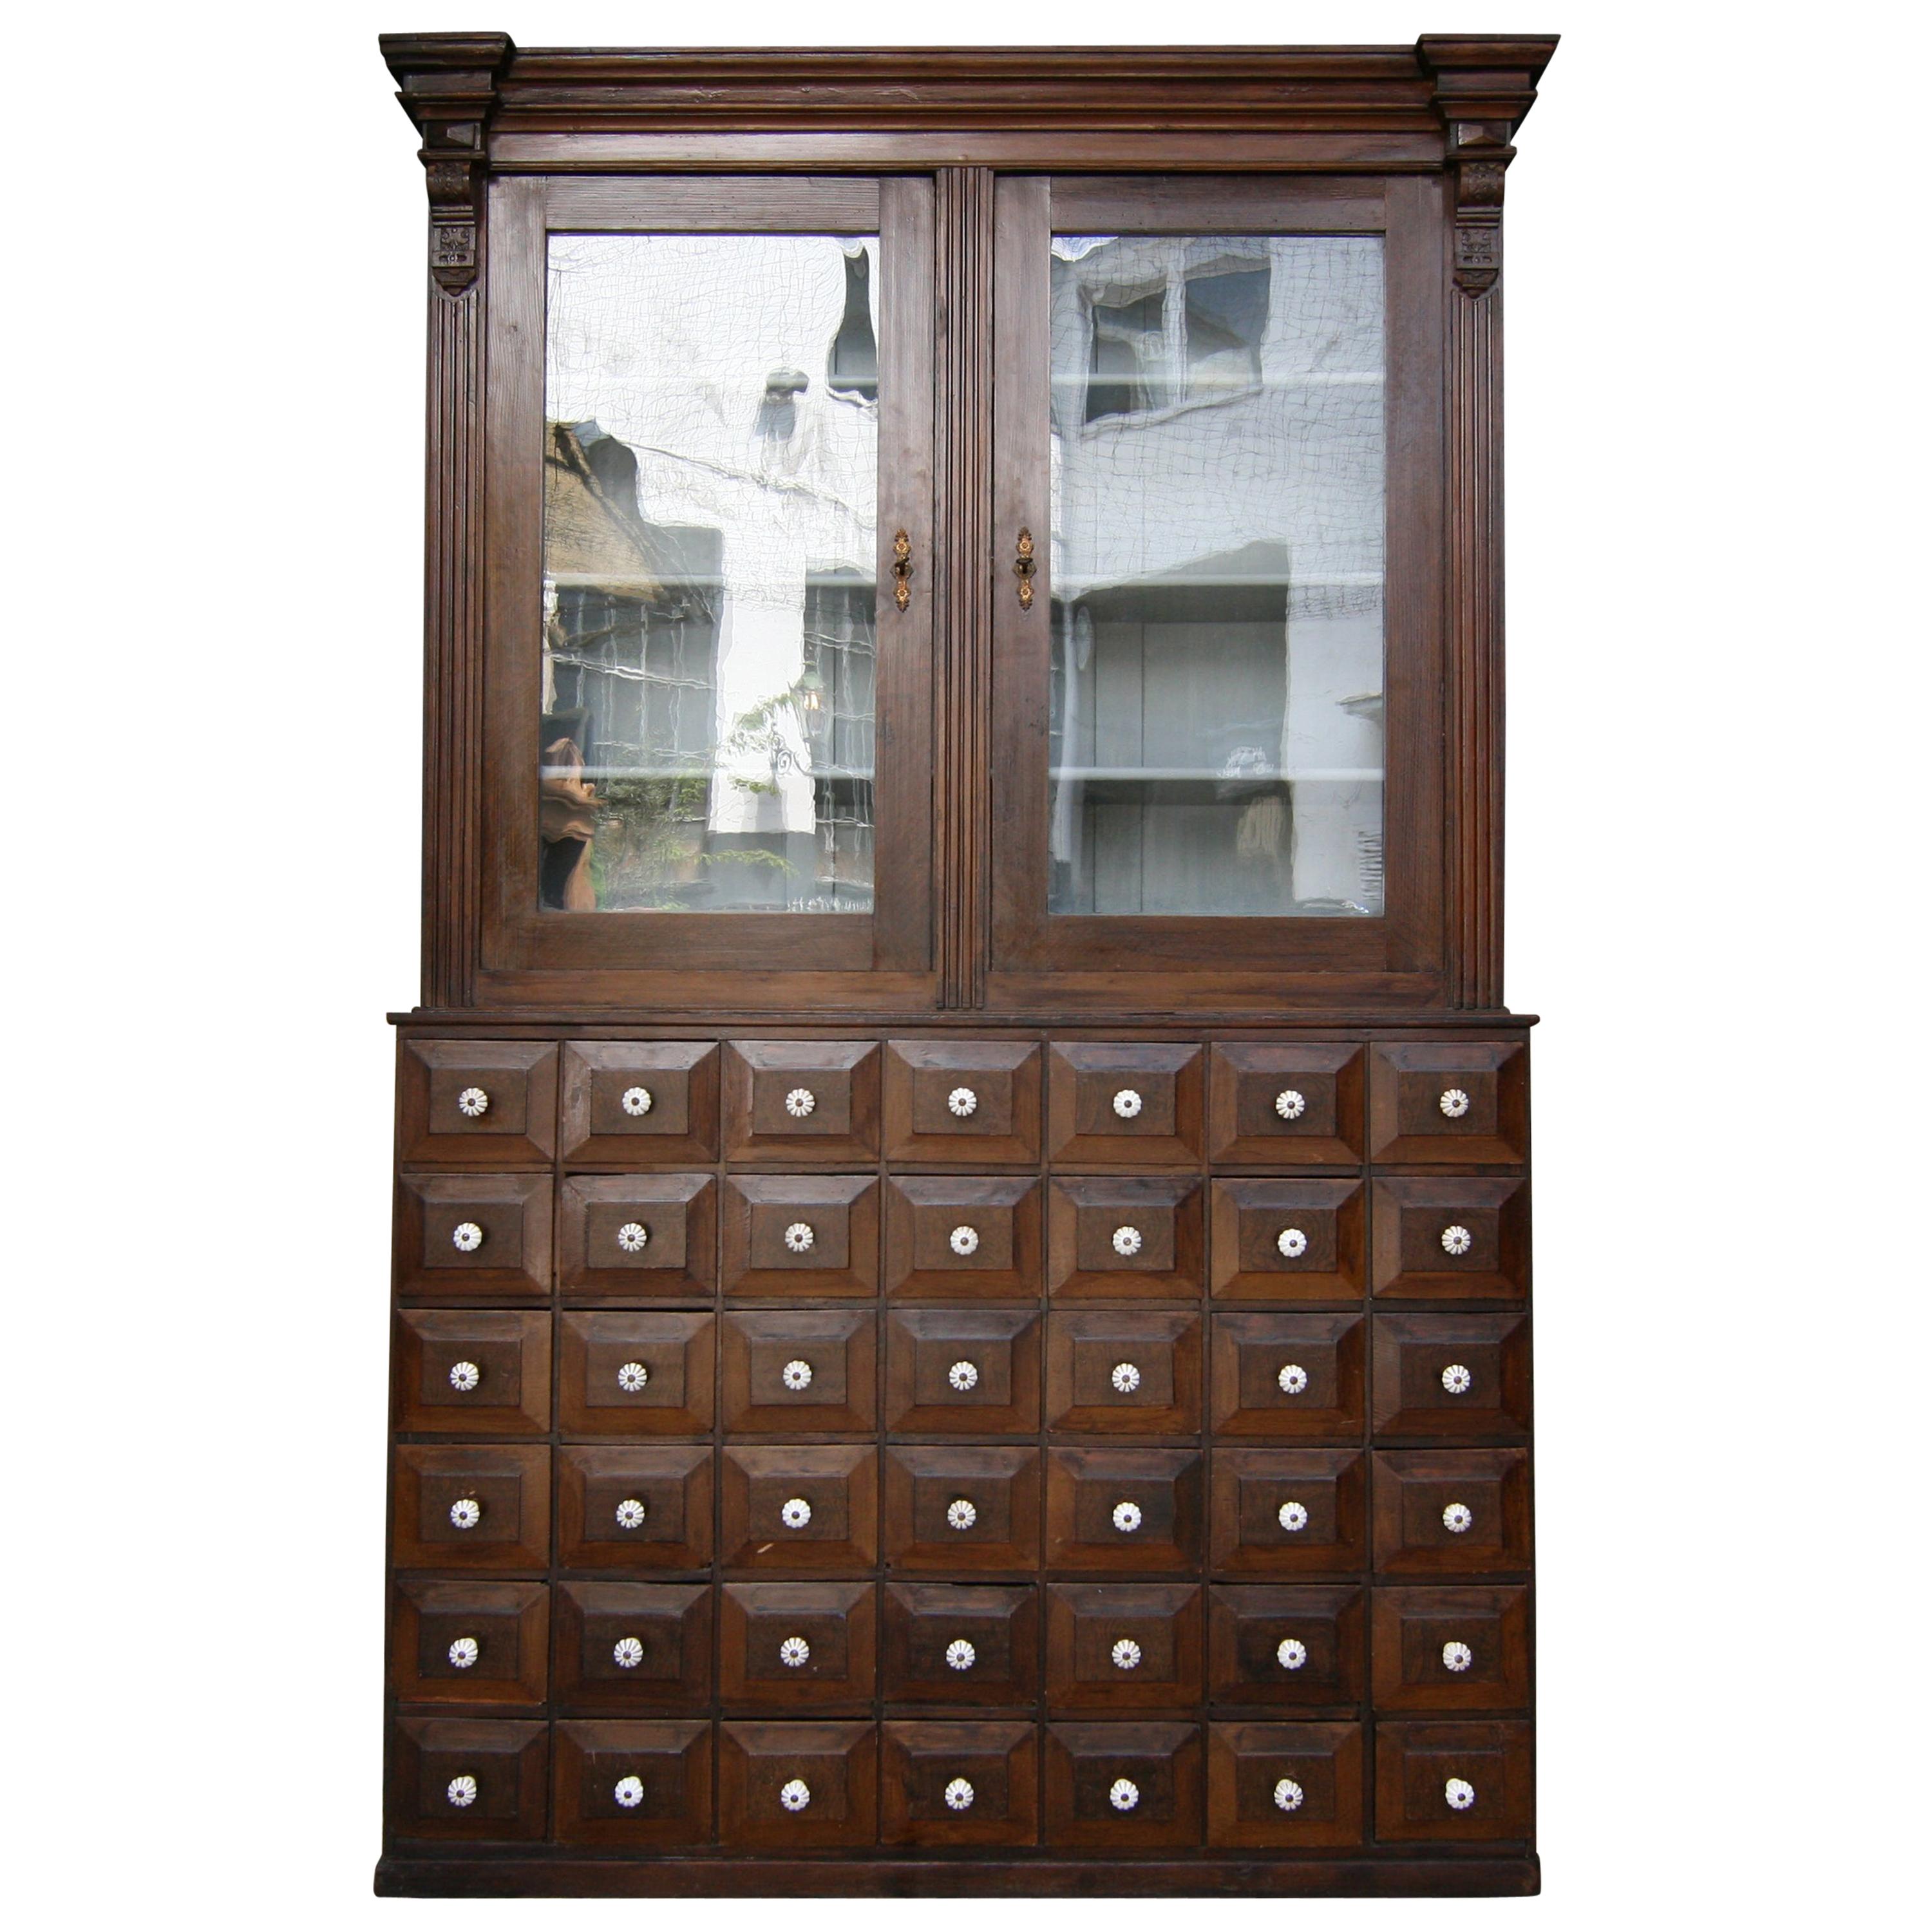 19th Century German Apothecary Cabinet in Original Paint